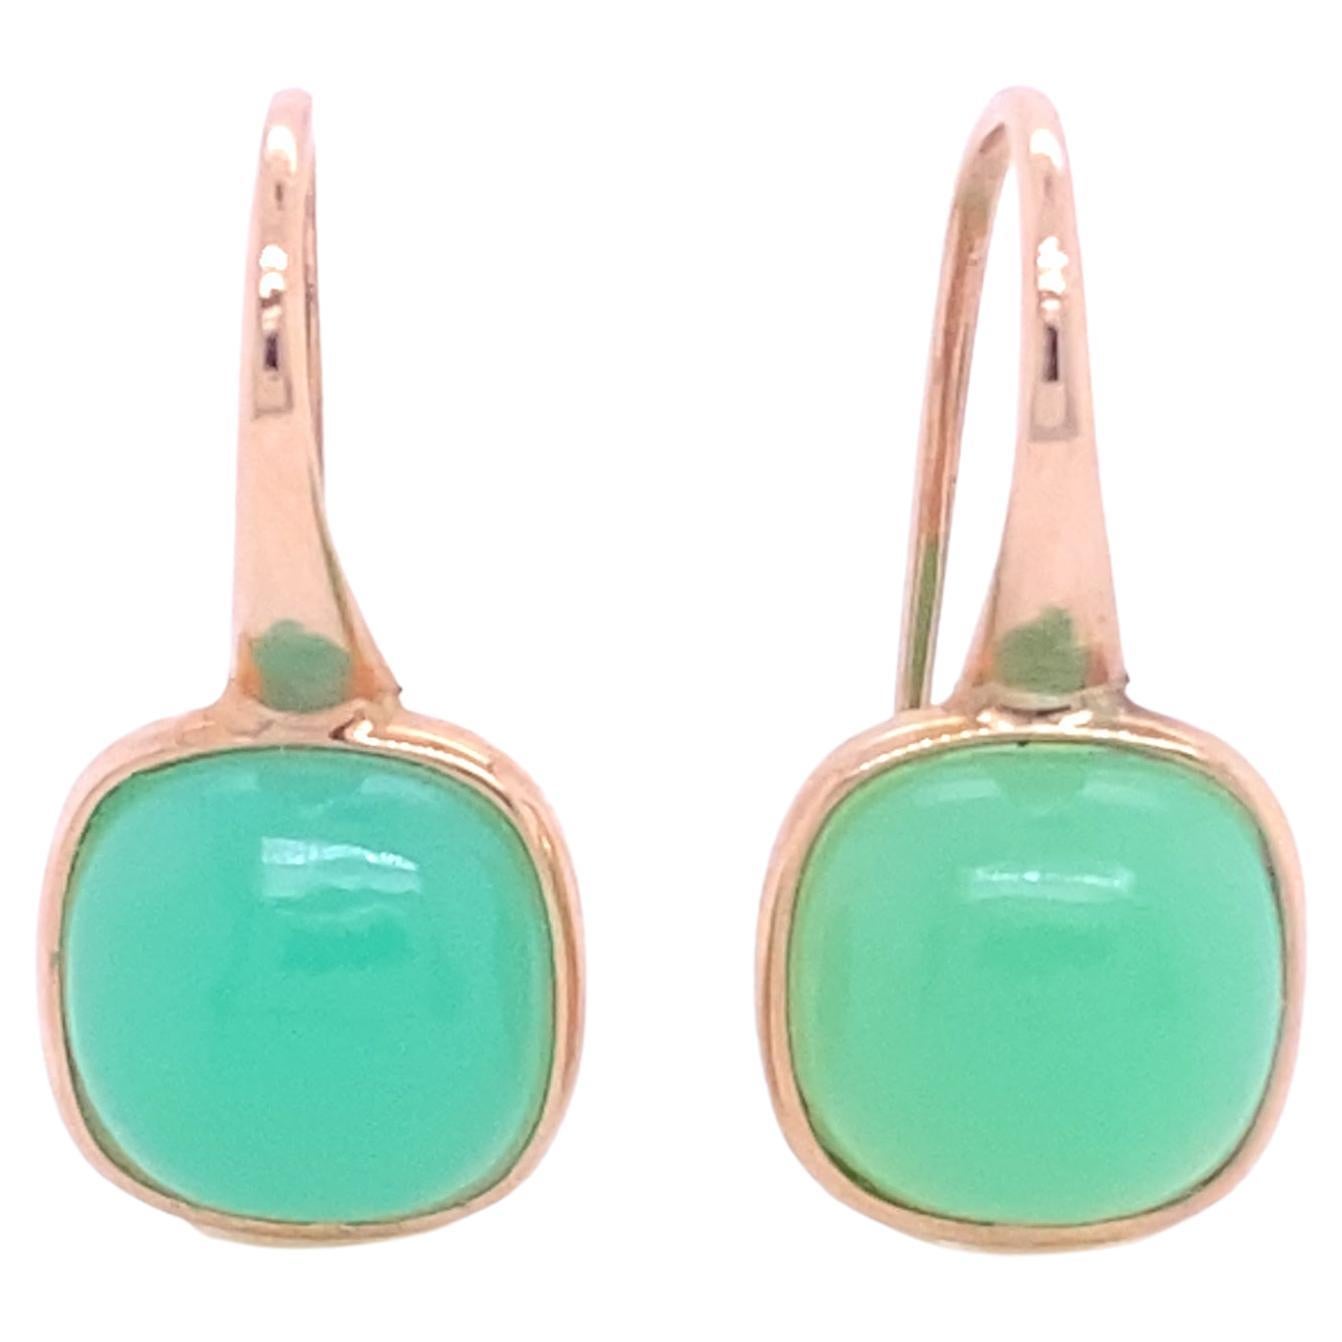 Rose Gold and Crisoprasio Earrings
French Collection by Mesure et Art du Temps. 

Cute 18 Carat yellow gold earrings accompanied by a crisoprasio.
The earring measures 3.3 cm in length, and 1.5 cm in width.
The weight of the gold is 2.30 Carat and